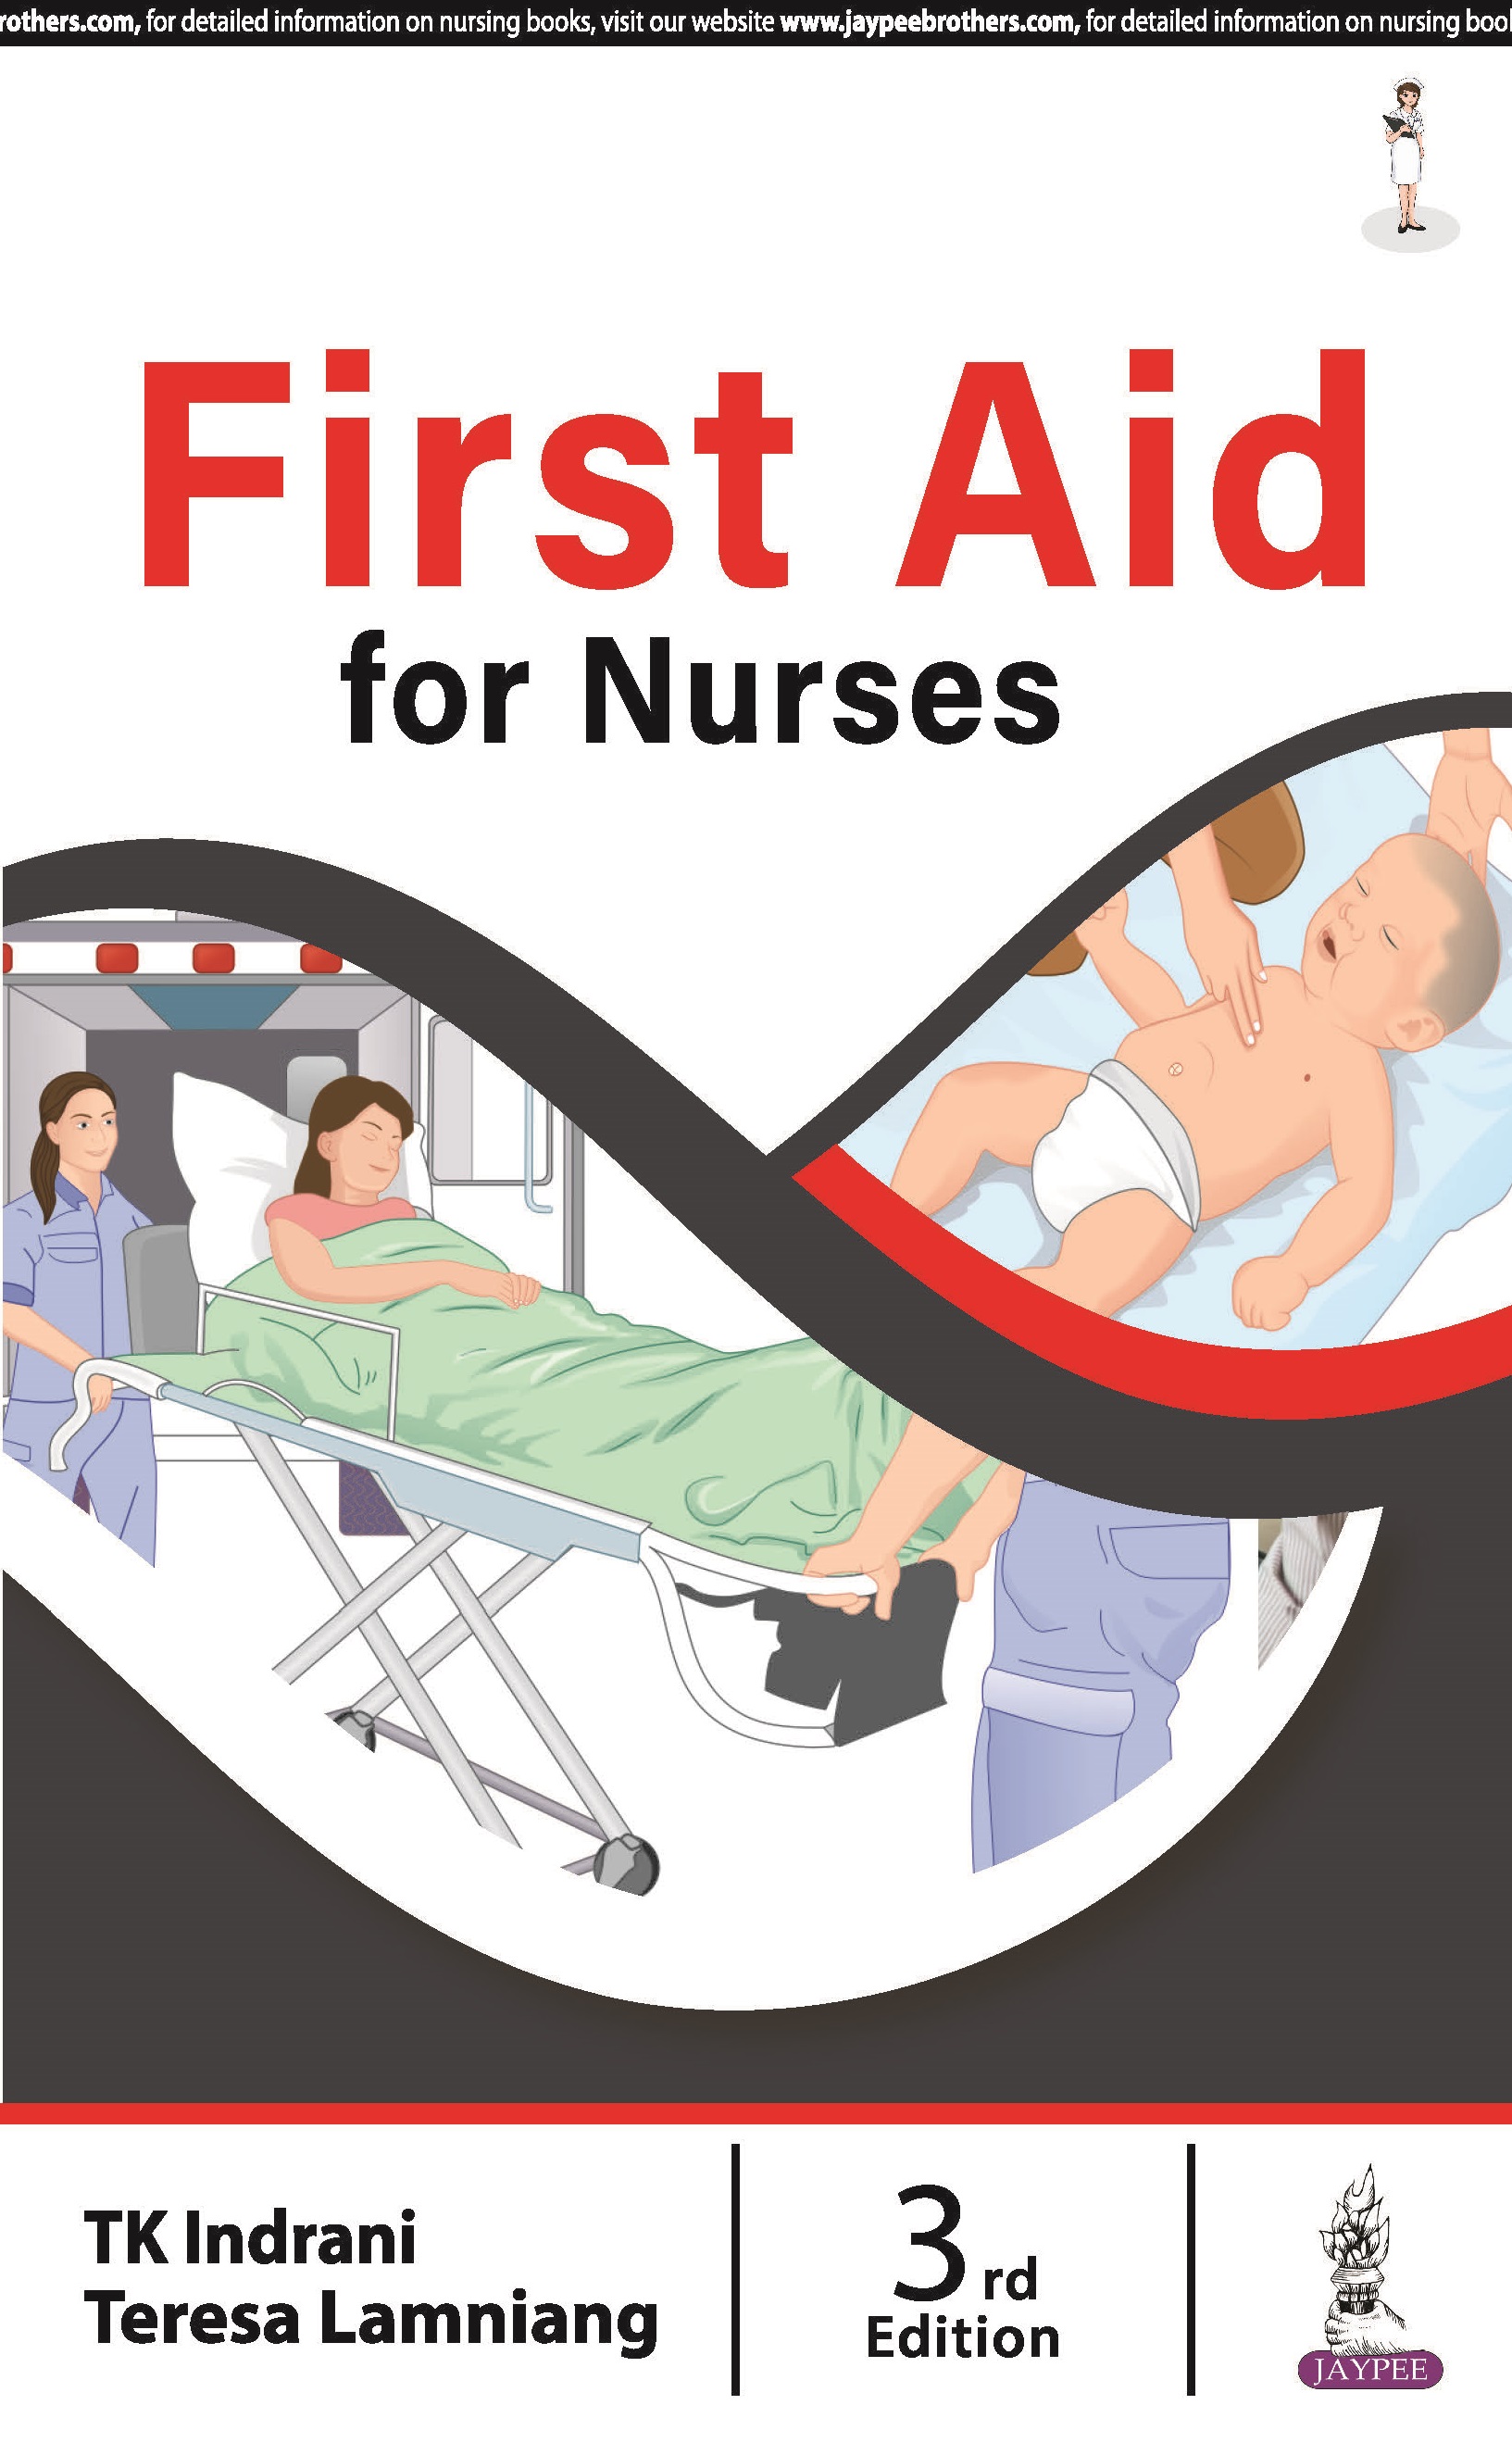 First Aid for Nurses 3rd Edition